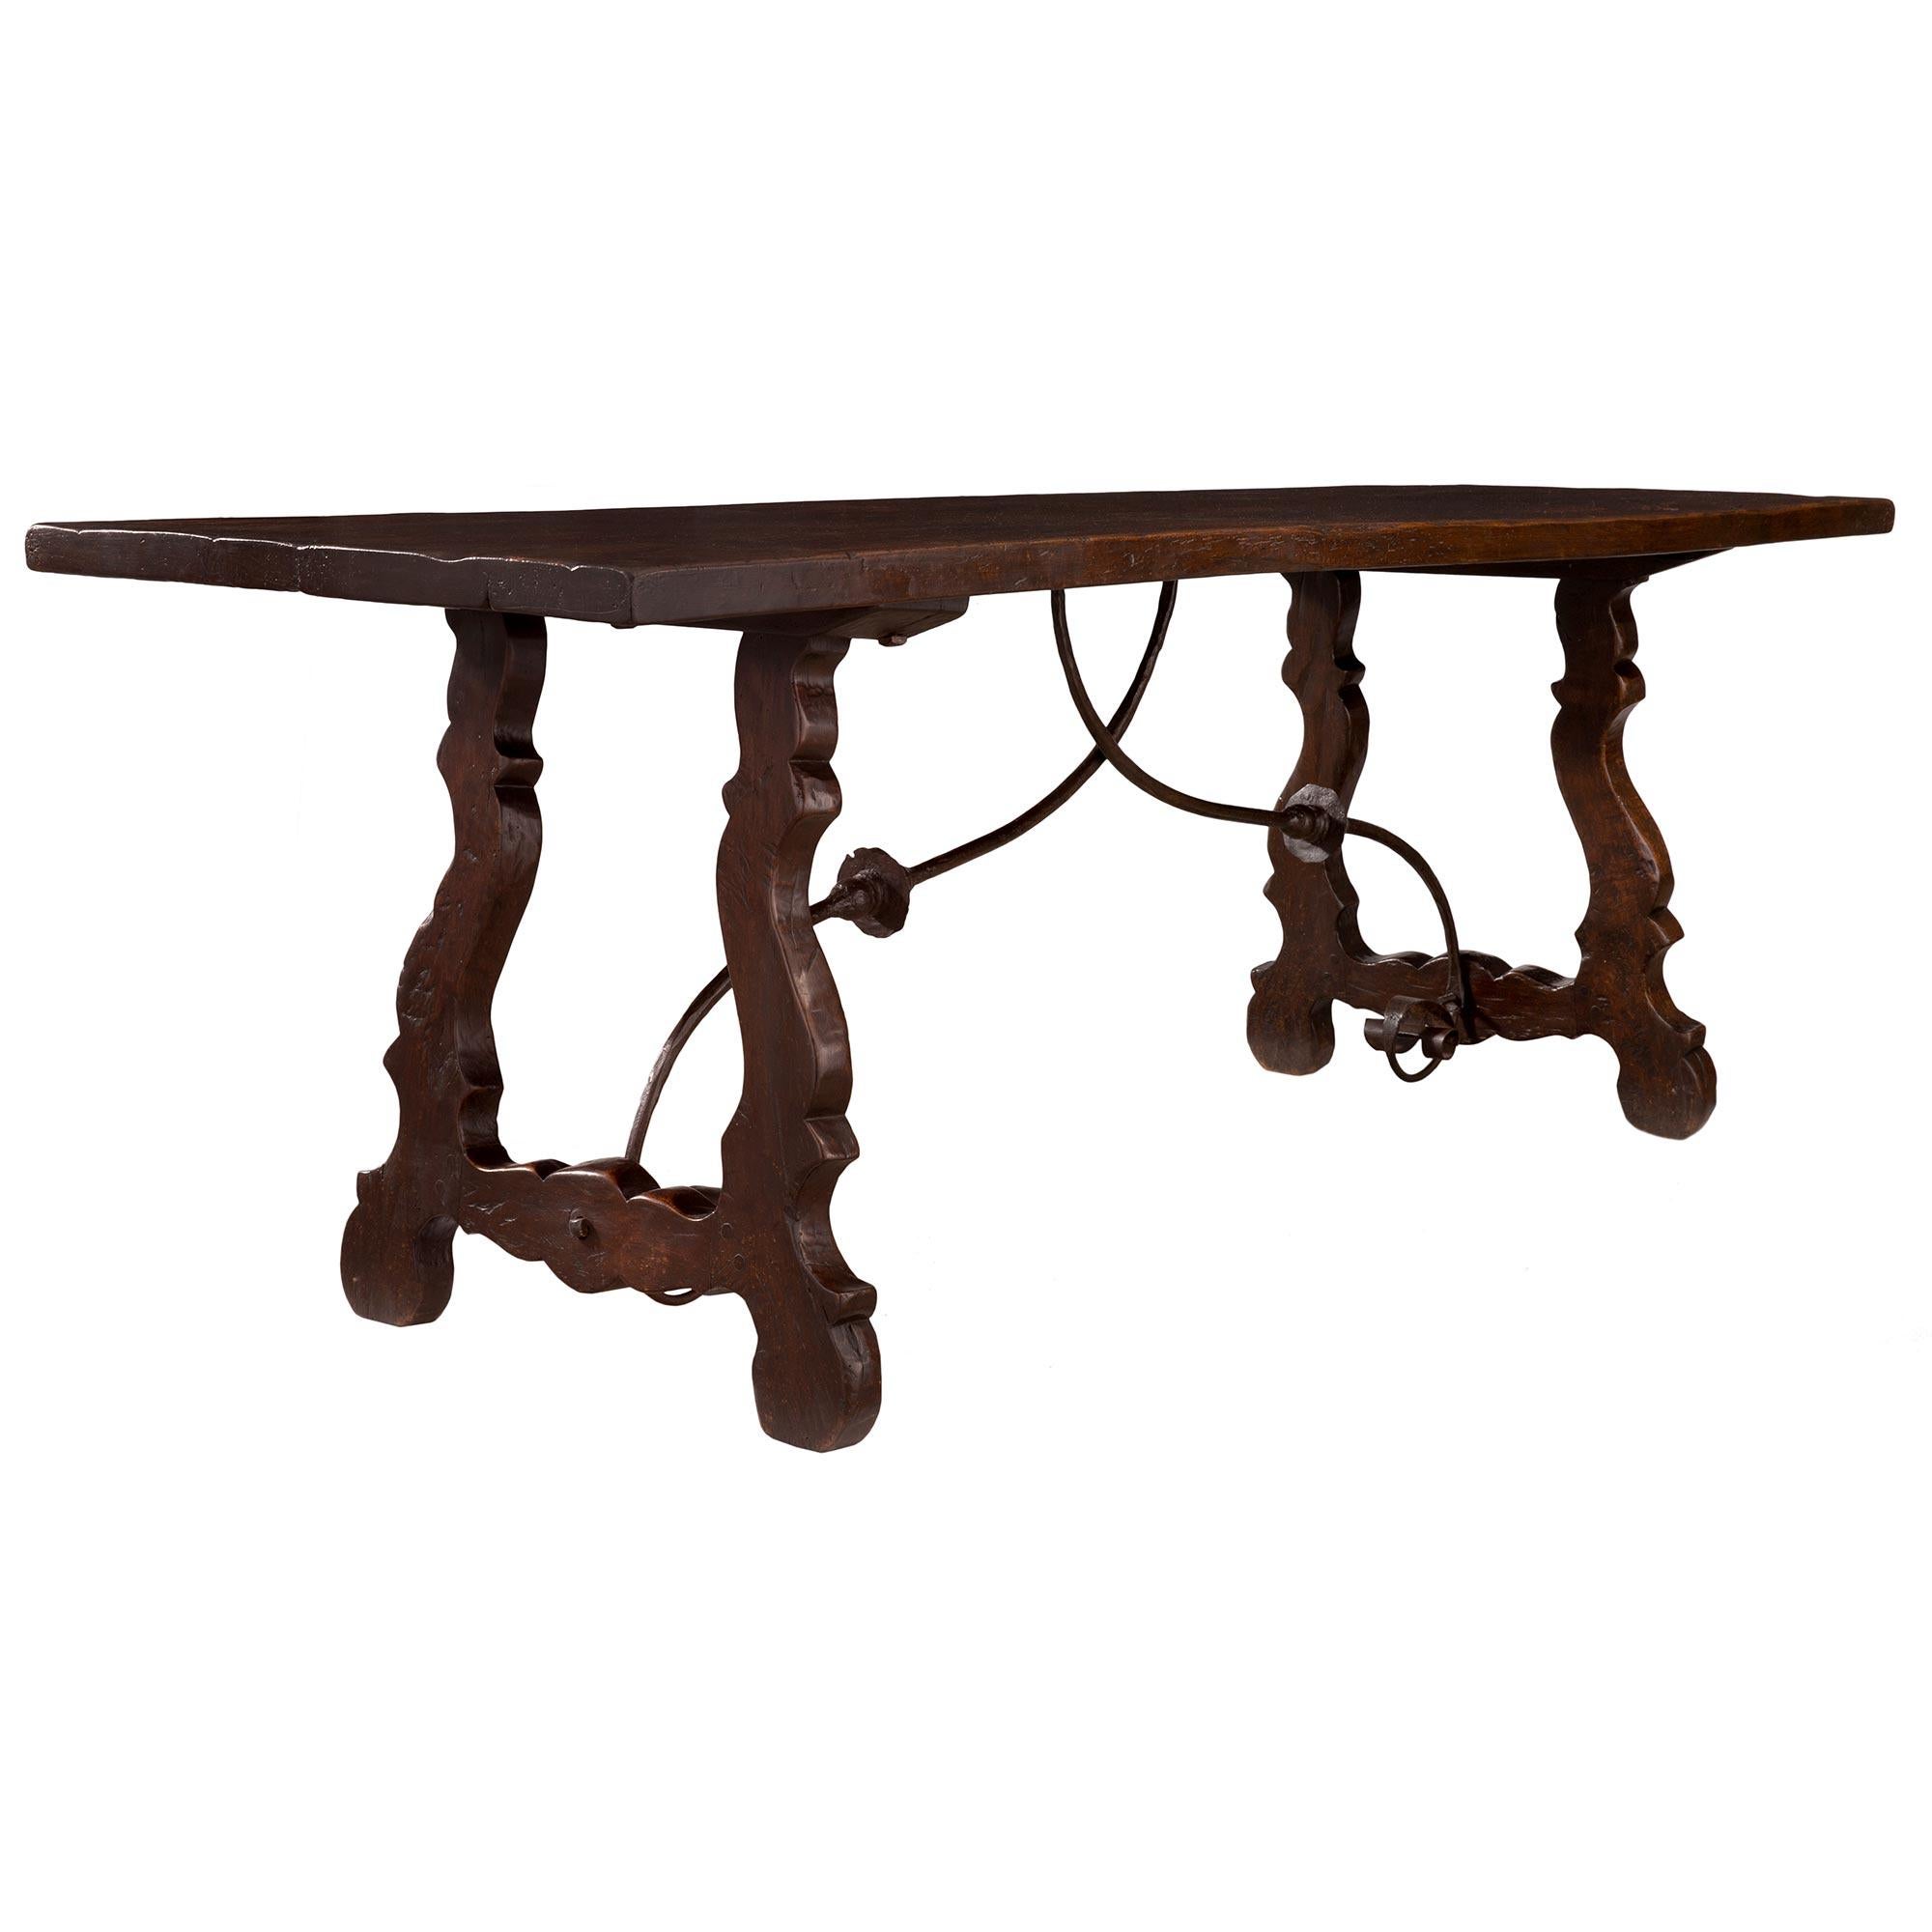 Spanish Mid-19th Century Country Style Dark Oak Trestle Dining/Center Table In Good Condition For Sale In West Palm Beach, FL